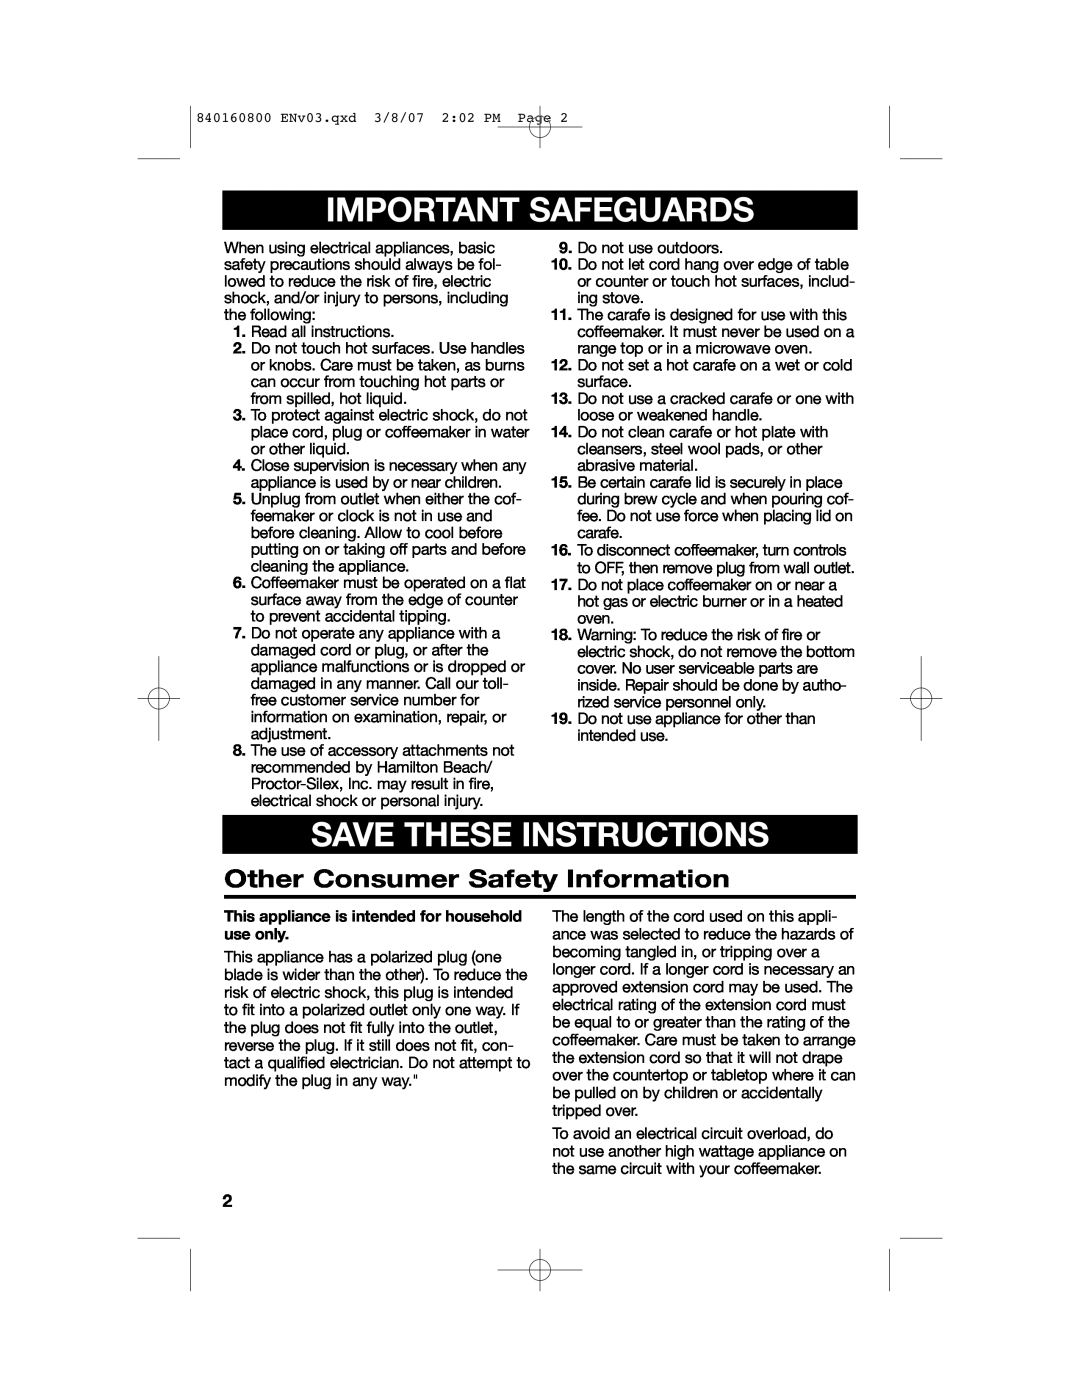 Hamilton Beach 840160800 manual Important Safeguards, Save These Instructions, Other Consumer Safety Information 